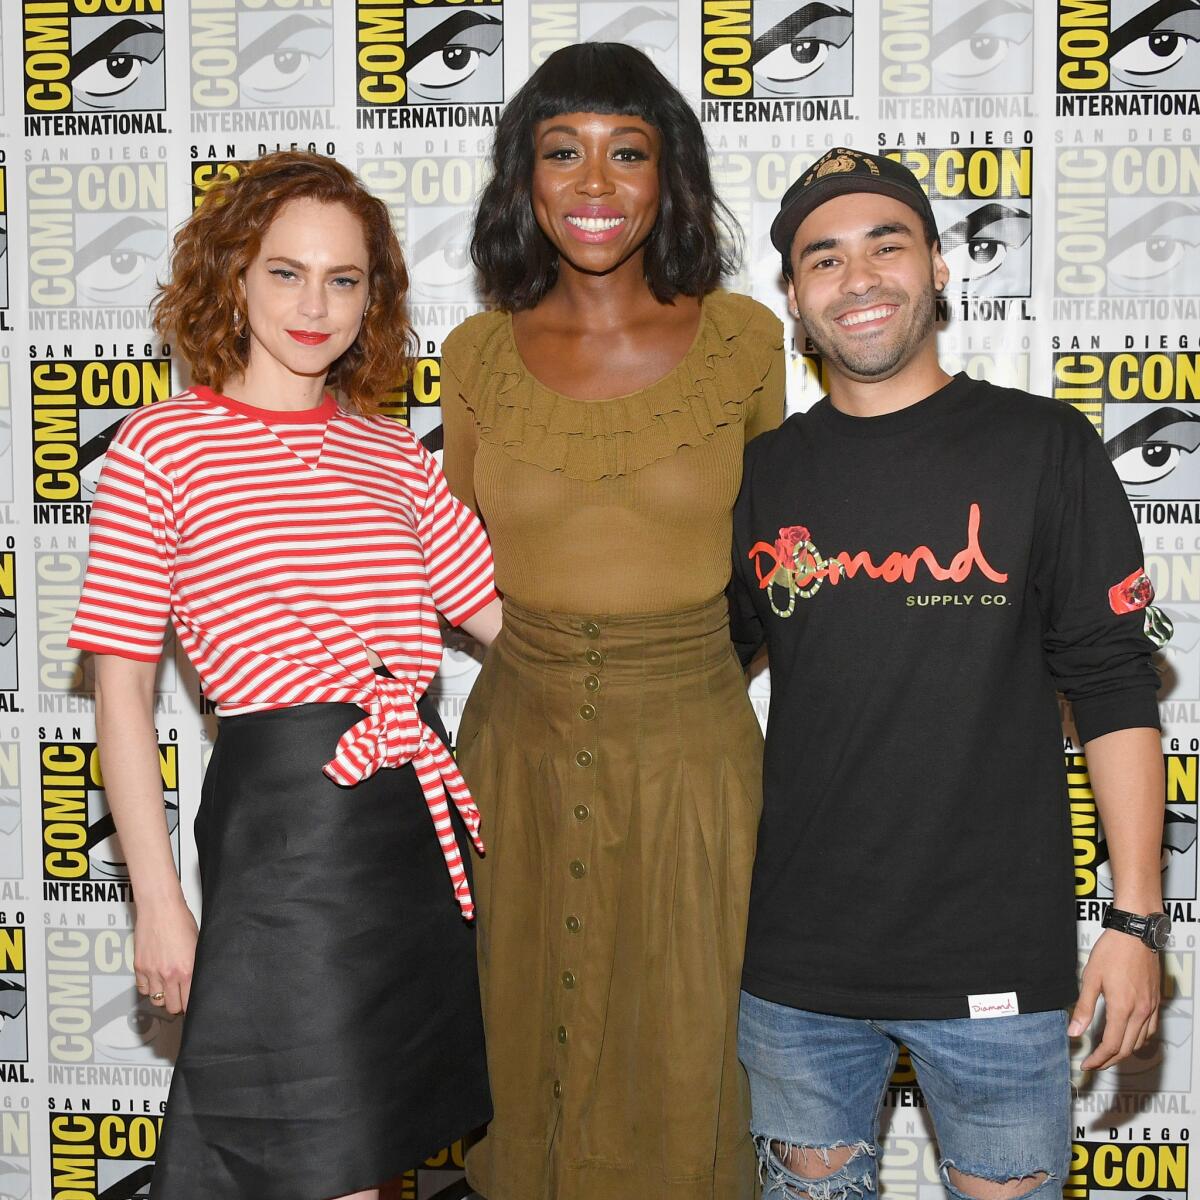 From left, Fiona Dourif, Amanda Warren and Gabriel Chavarria attend the "Purge" Press Line during Comic-Con International 2018.